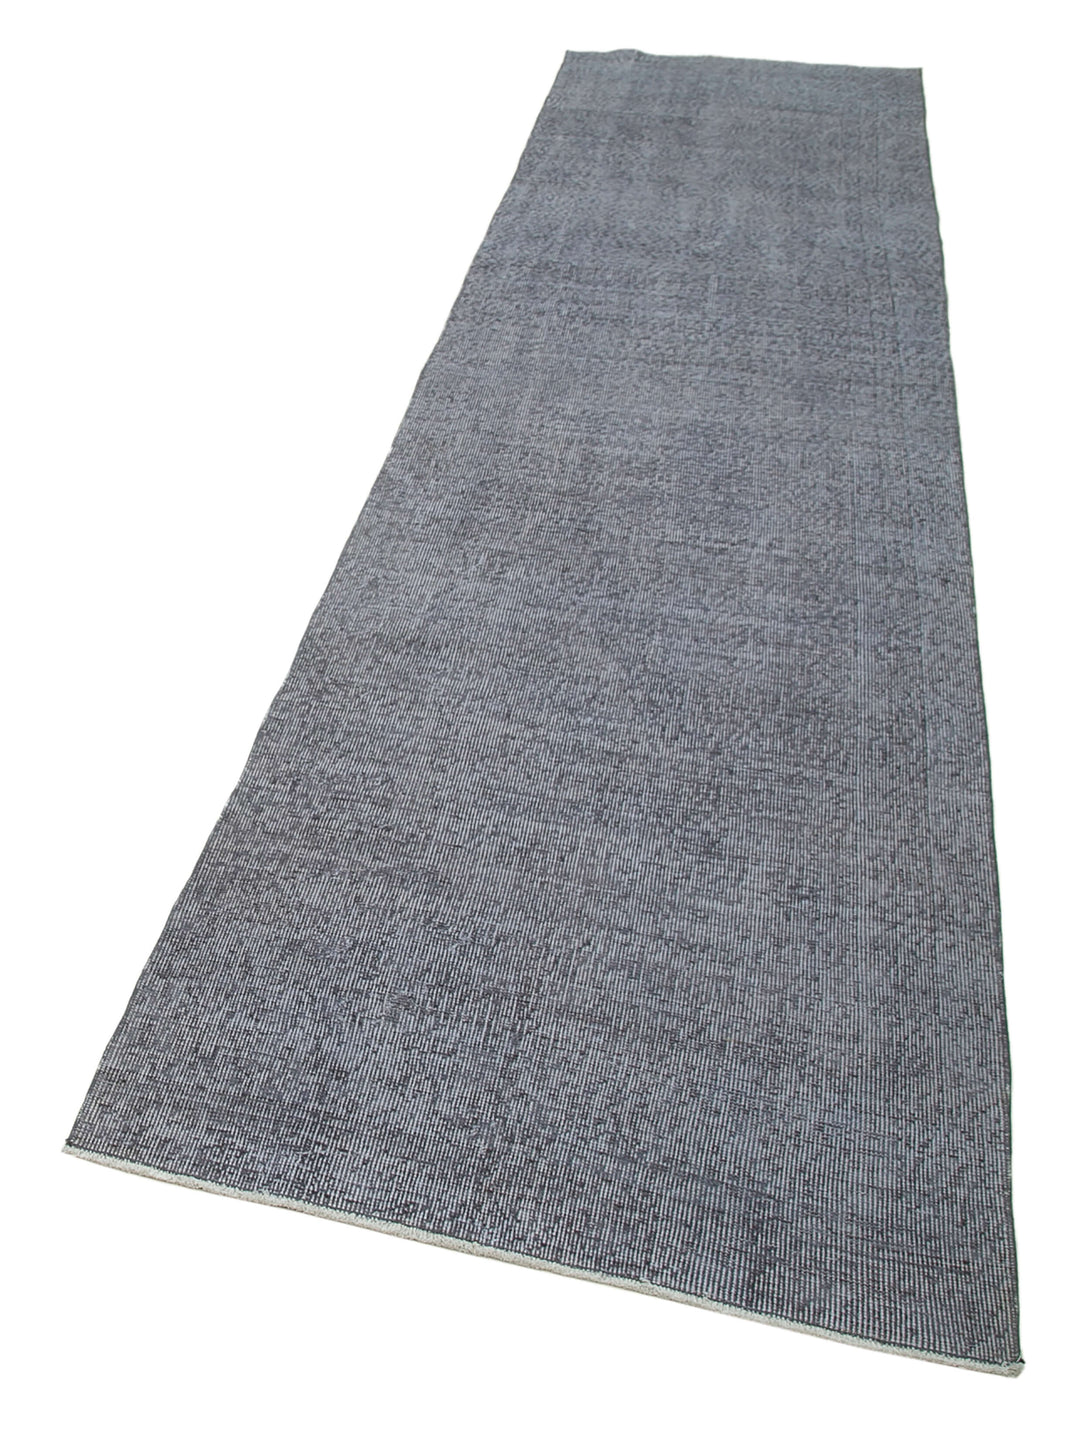 Handmade Overdyed Runner > Design# OL-AC-34184 > Size: 3'-0" x 12'-0", Carpet Culture Rugs, Handmade Rugs, NYC Rugs, New Rugs, Shop Rugs, Rug Store, Outlet Rugs, SoHo Rugs, Rugs in USA